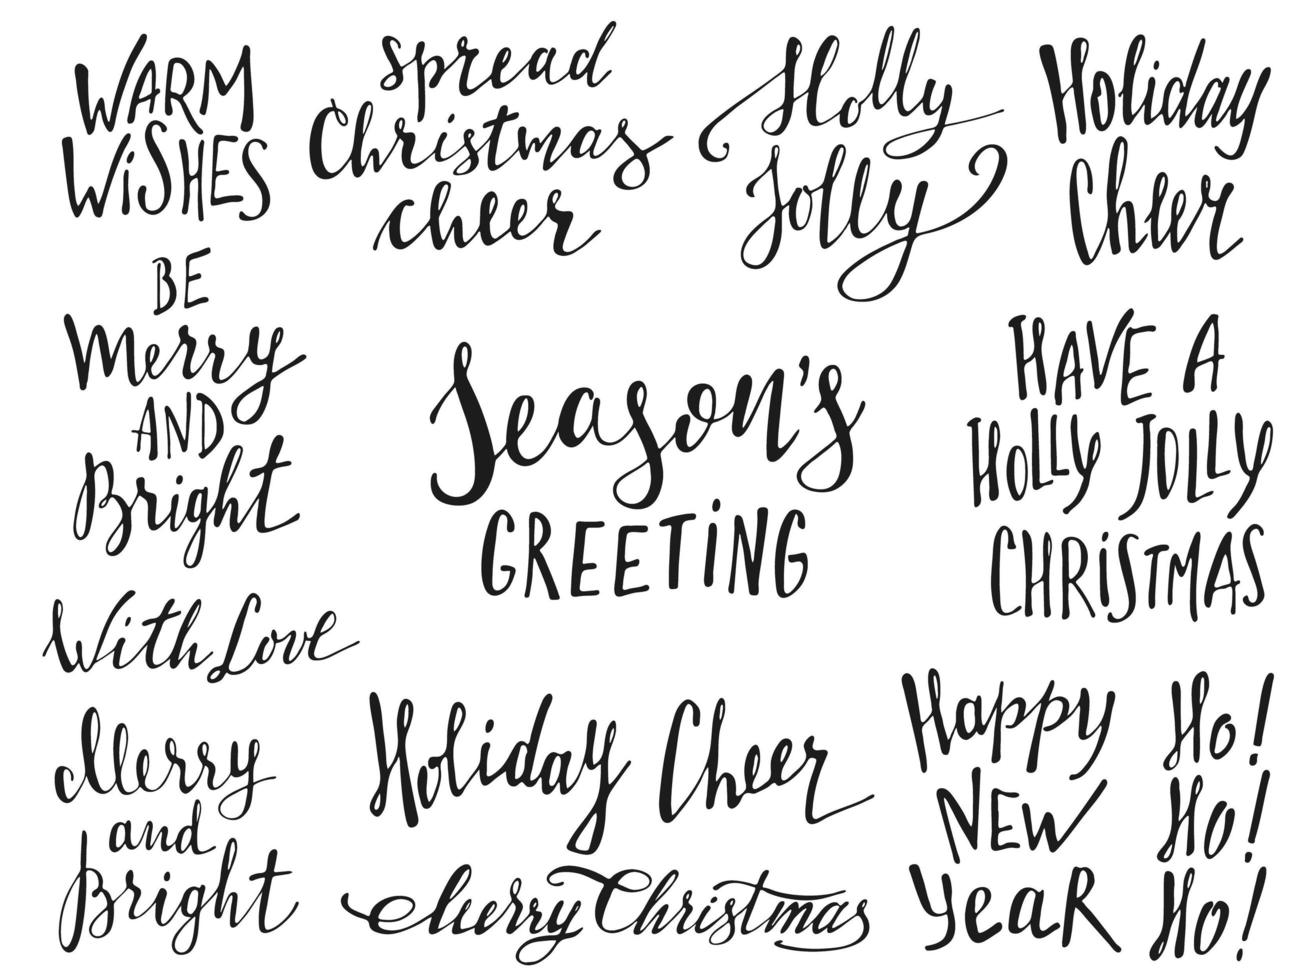 Merry Christmas Lettering Design. Greeting text. Vector illustration EPS10